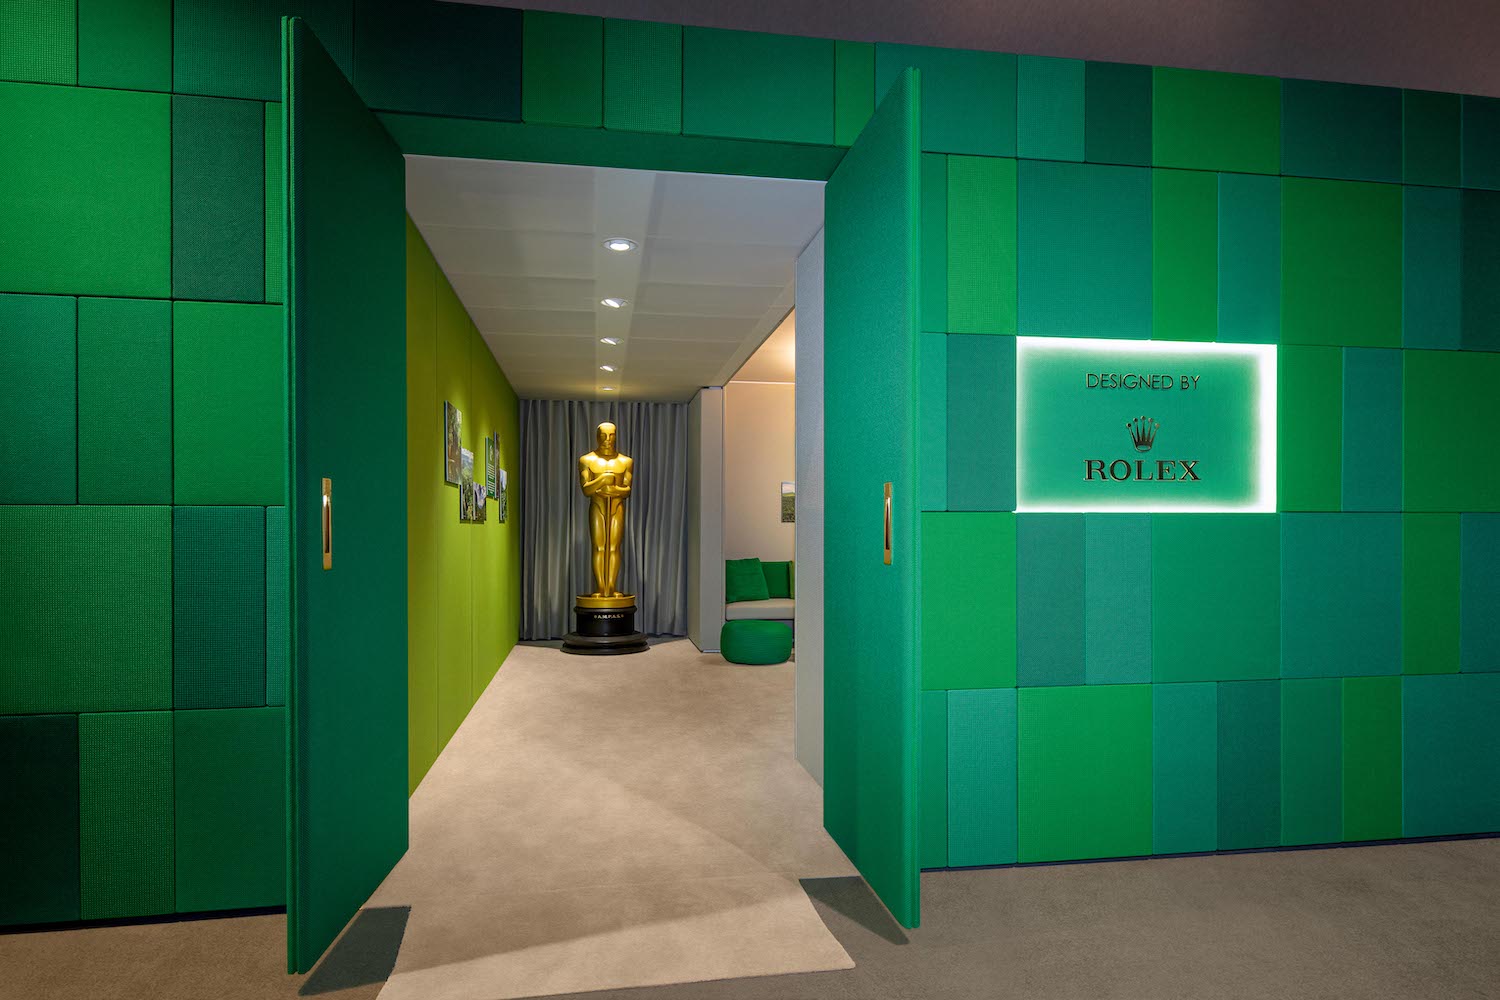 The 2023 Oscars Greenroom, hosted and designed by Rolex.